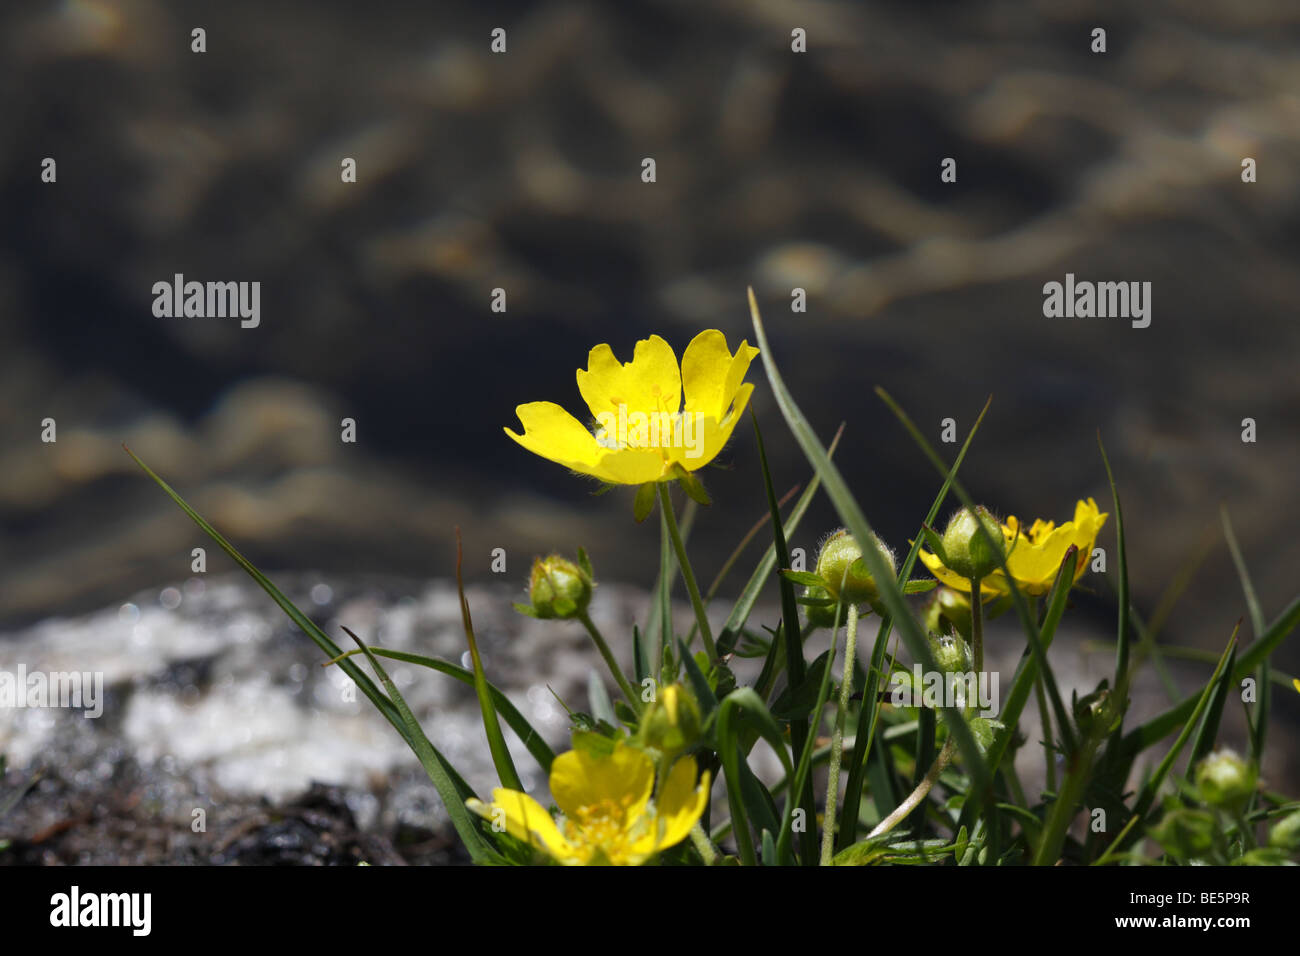 Yellow anemone or buttercup anemone (Anemone ranunculoides) Stock Photo